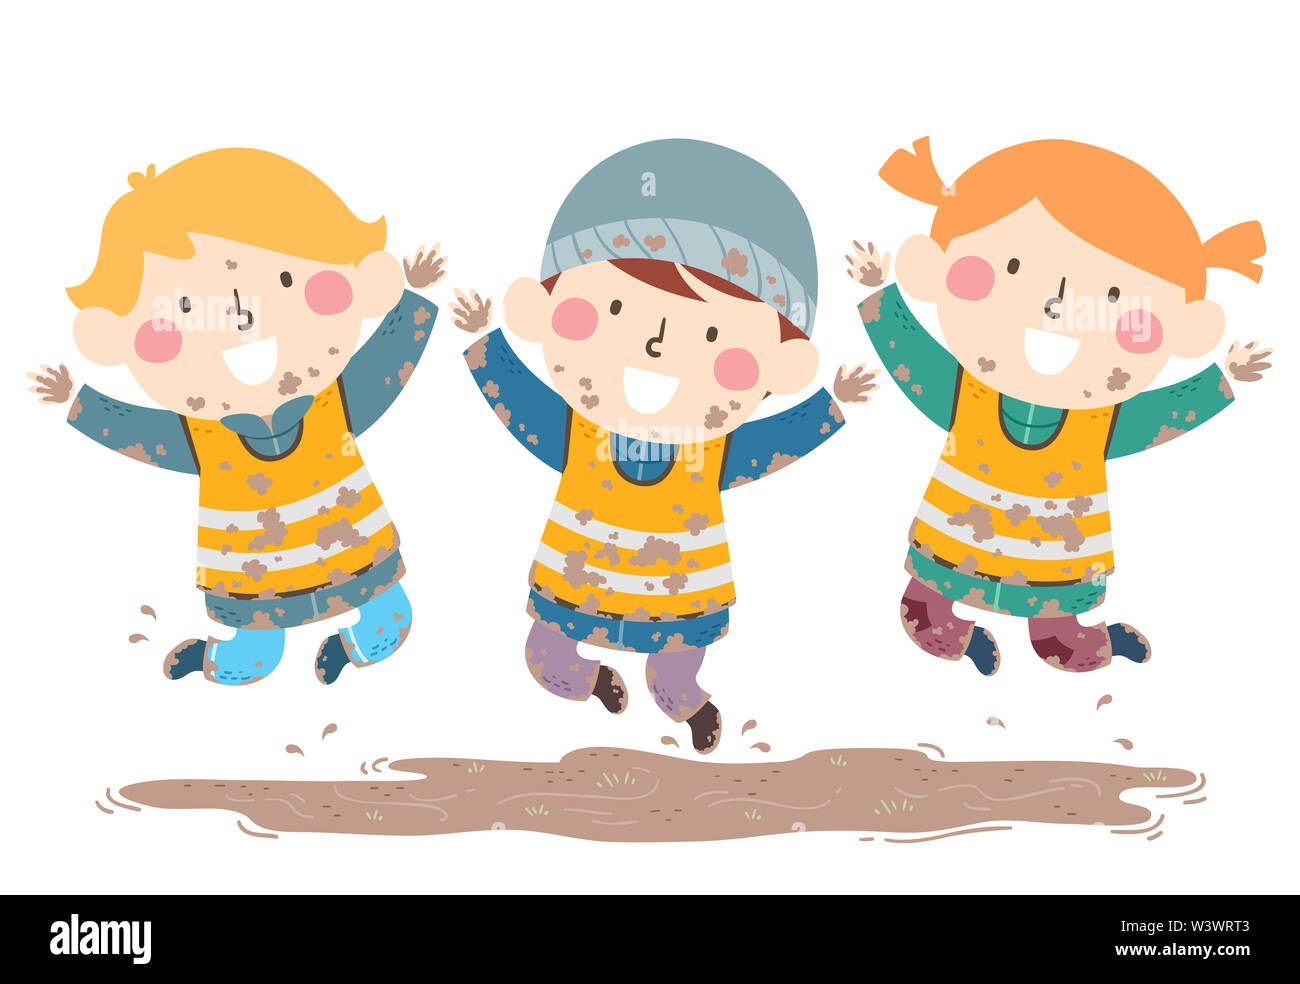 Illustration of Kids Wearing Yellow Vests, Jumping and Playing in the Mud Stock Photo